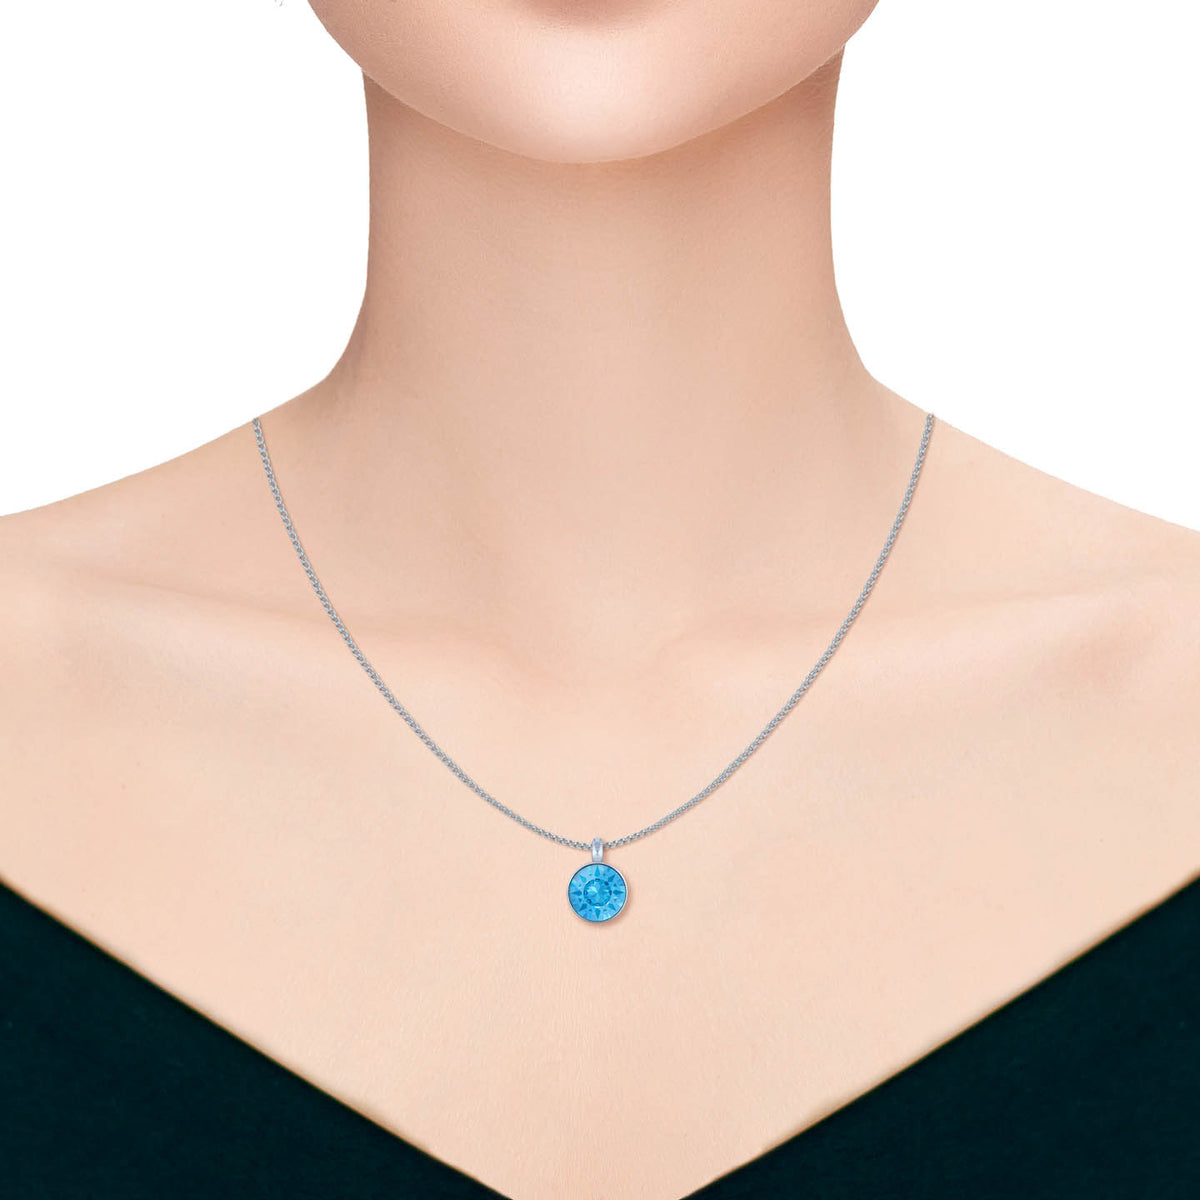 Bella Pendant Necklace with Blue Aquamarine Round Crystals from Swarovski Silver Toned Rhodium Plated - Ed Heart